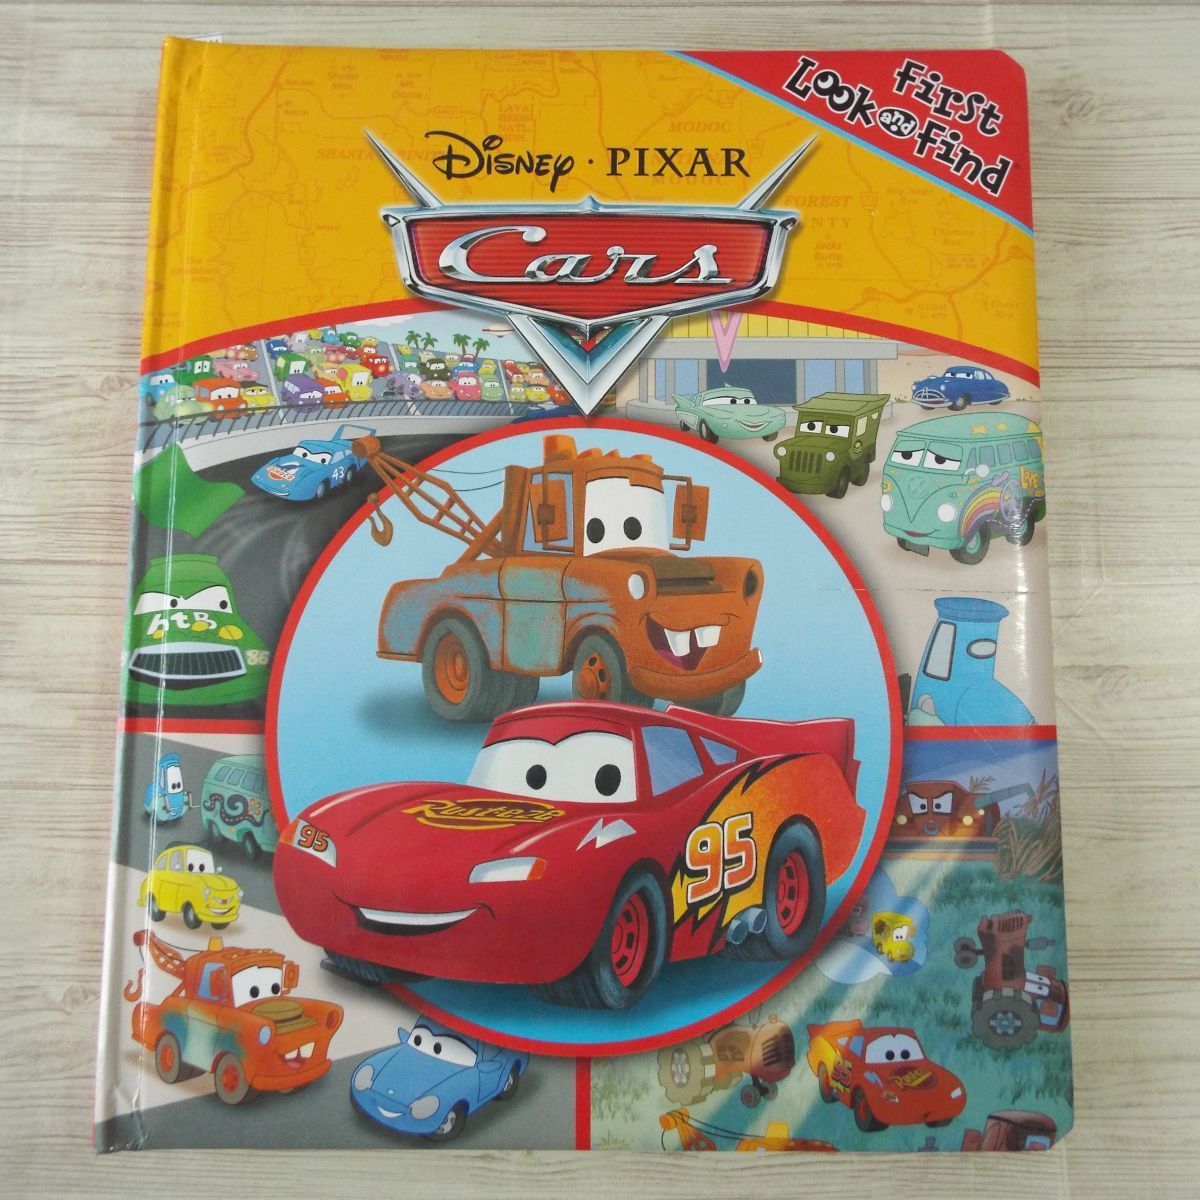  game picture book [ Disney *pik Sarcar z: First Look and Find( translation have )] foreign book large book@ English picture book . searching picture book 